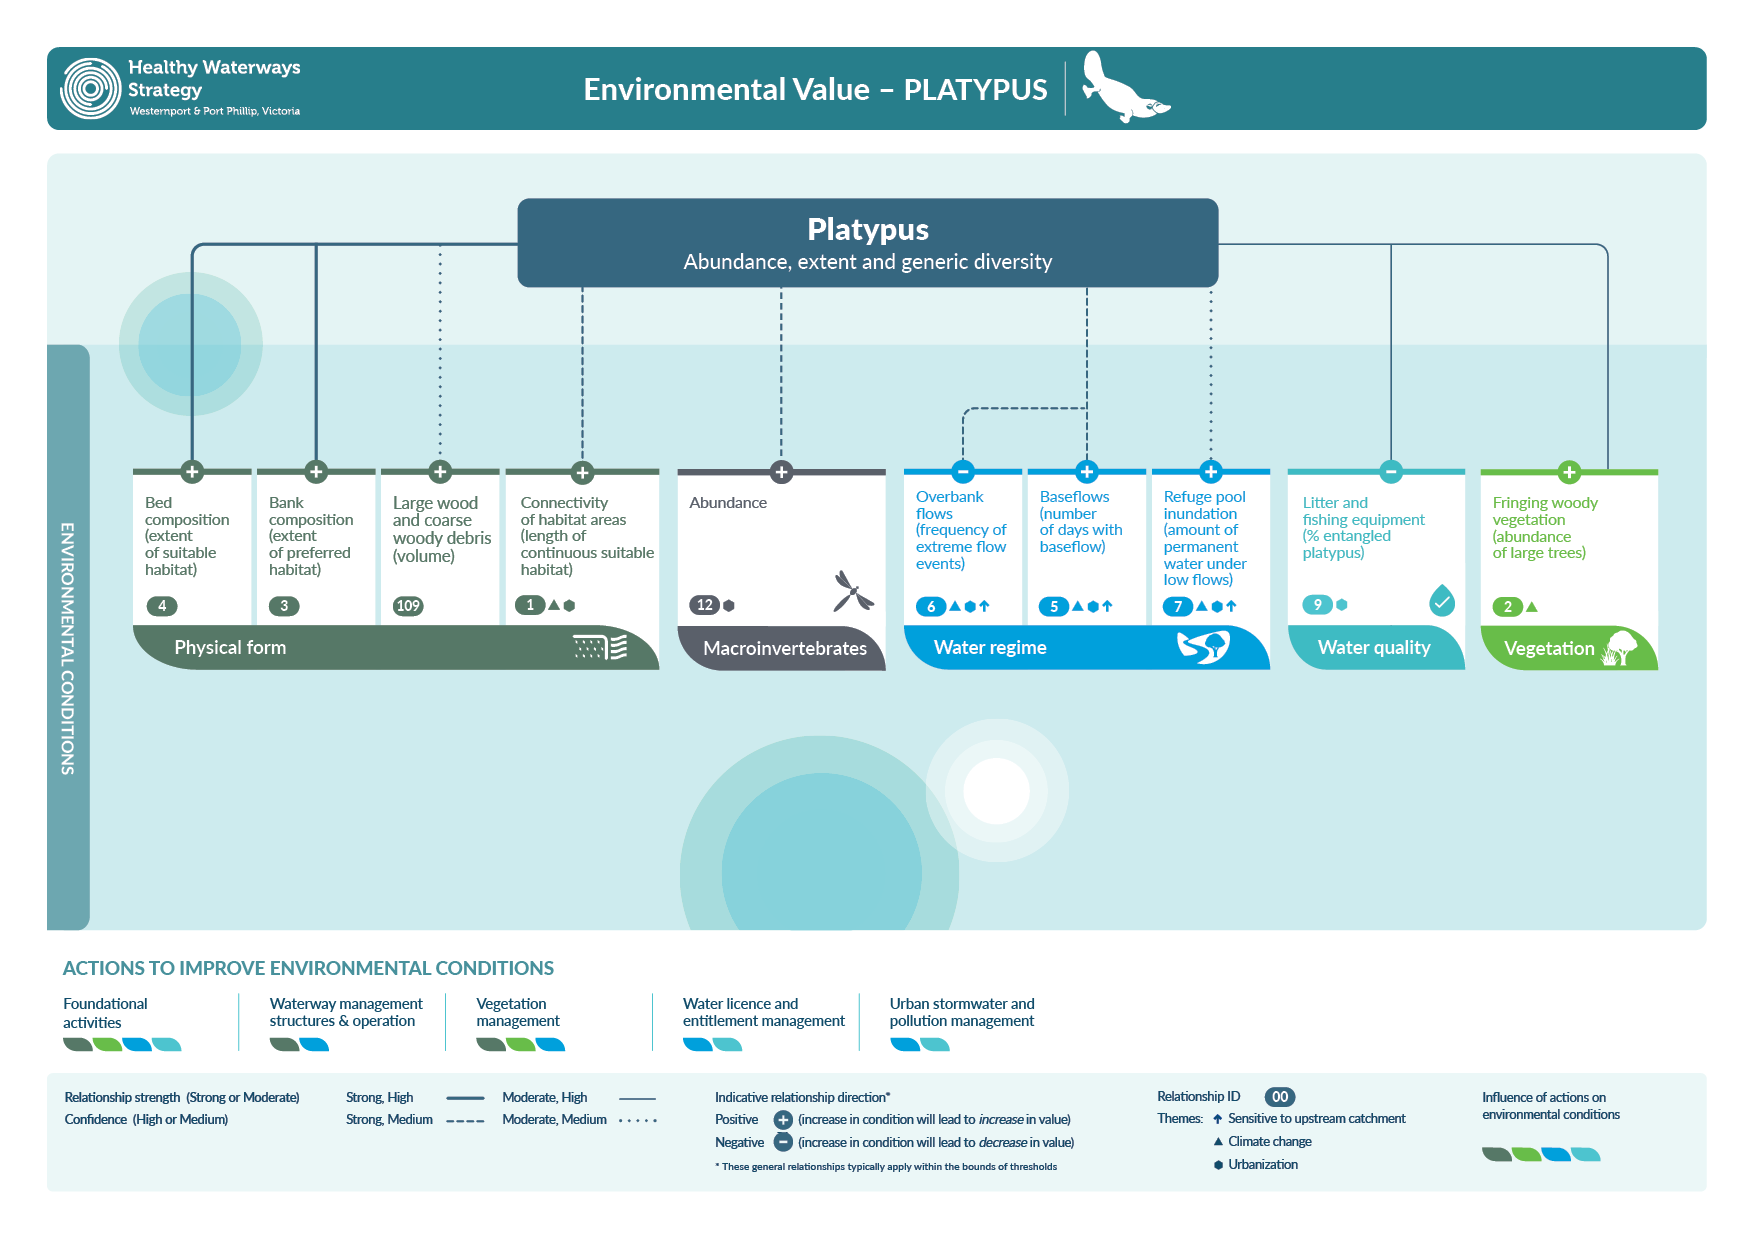 Healthy Waterways Strategy key value conceptual model for Platypus